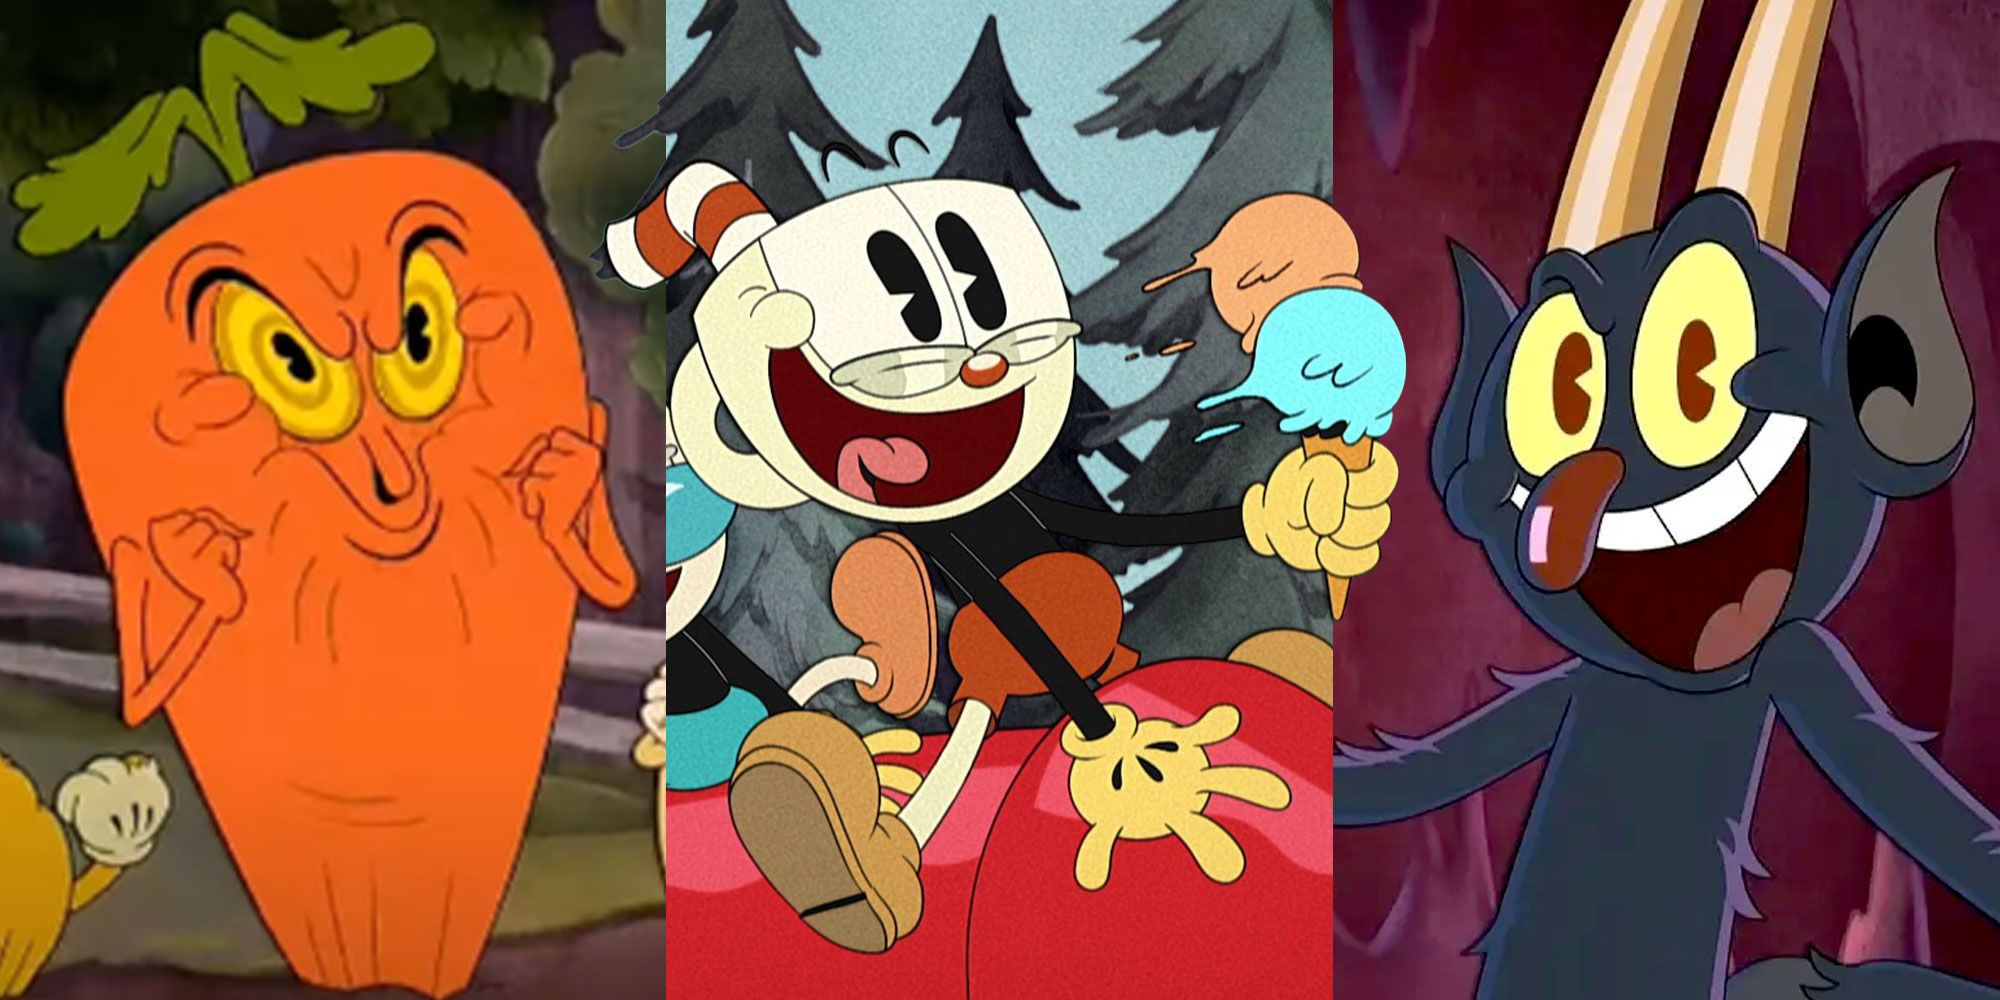 A split image of several characters from the Cuphead game and series.